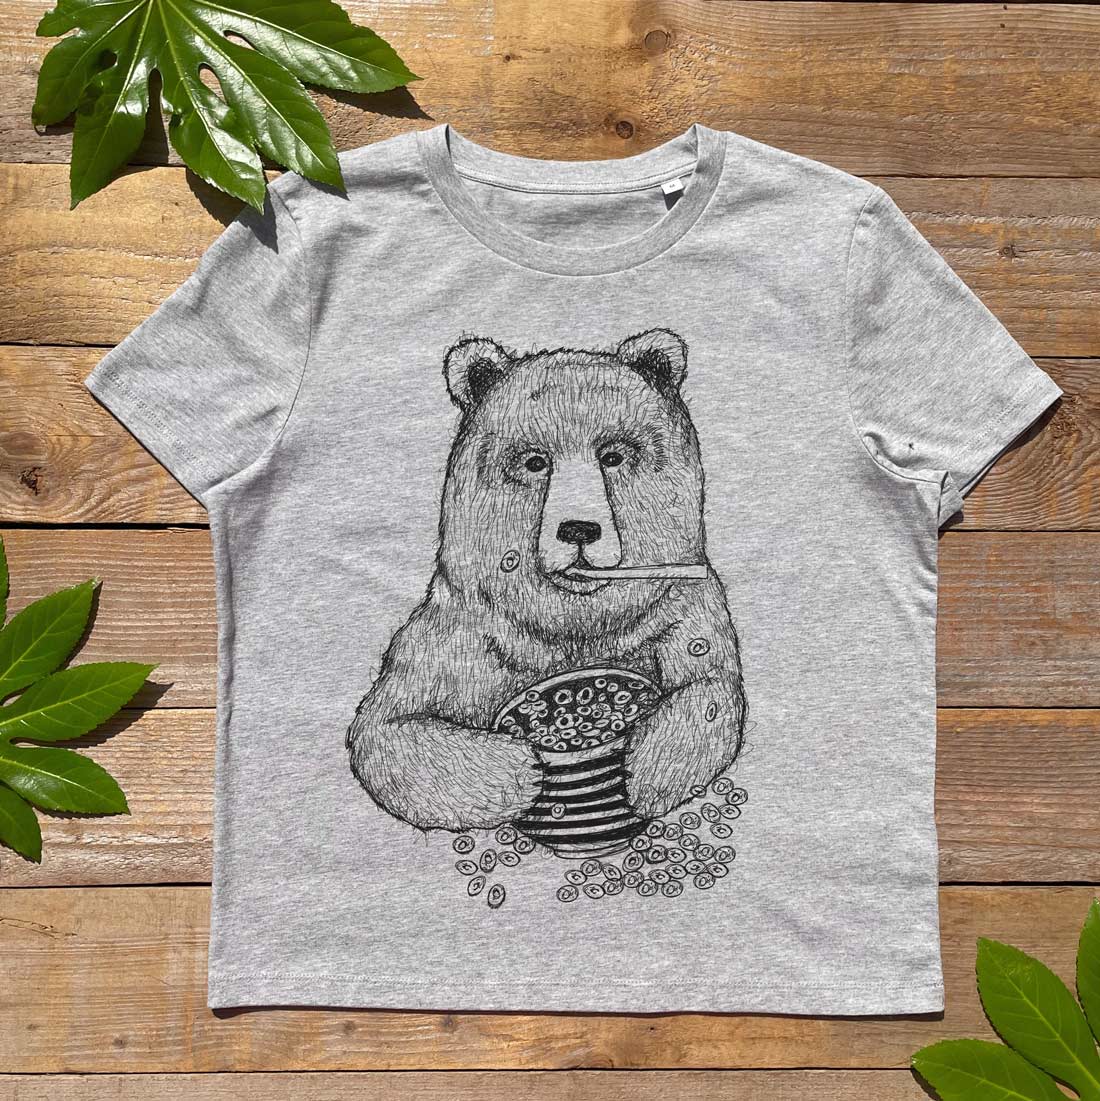 GREY TSHIRT WITH BEAR EATING BOWL OF CEREAL